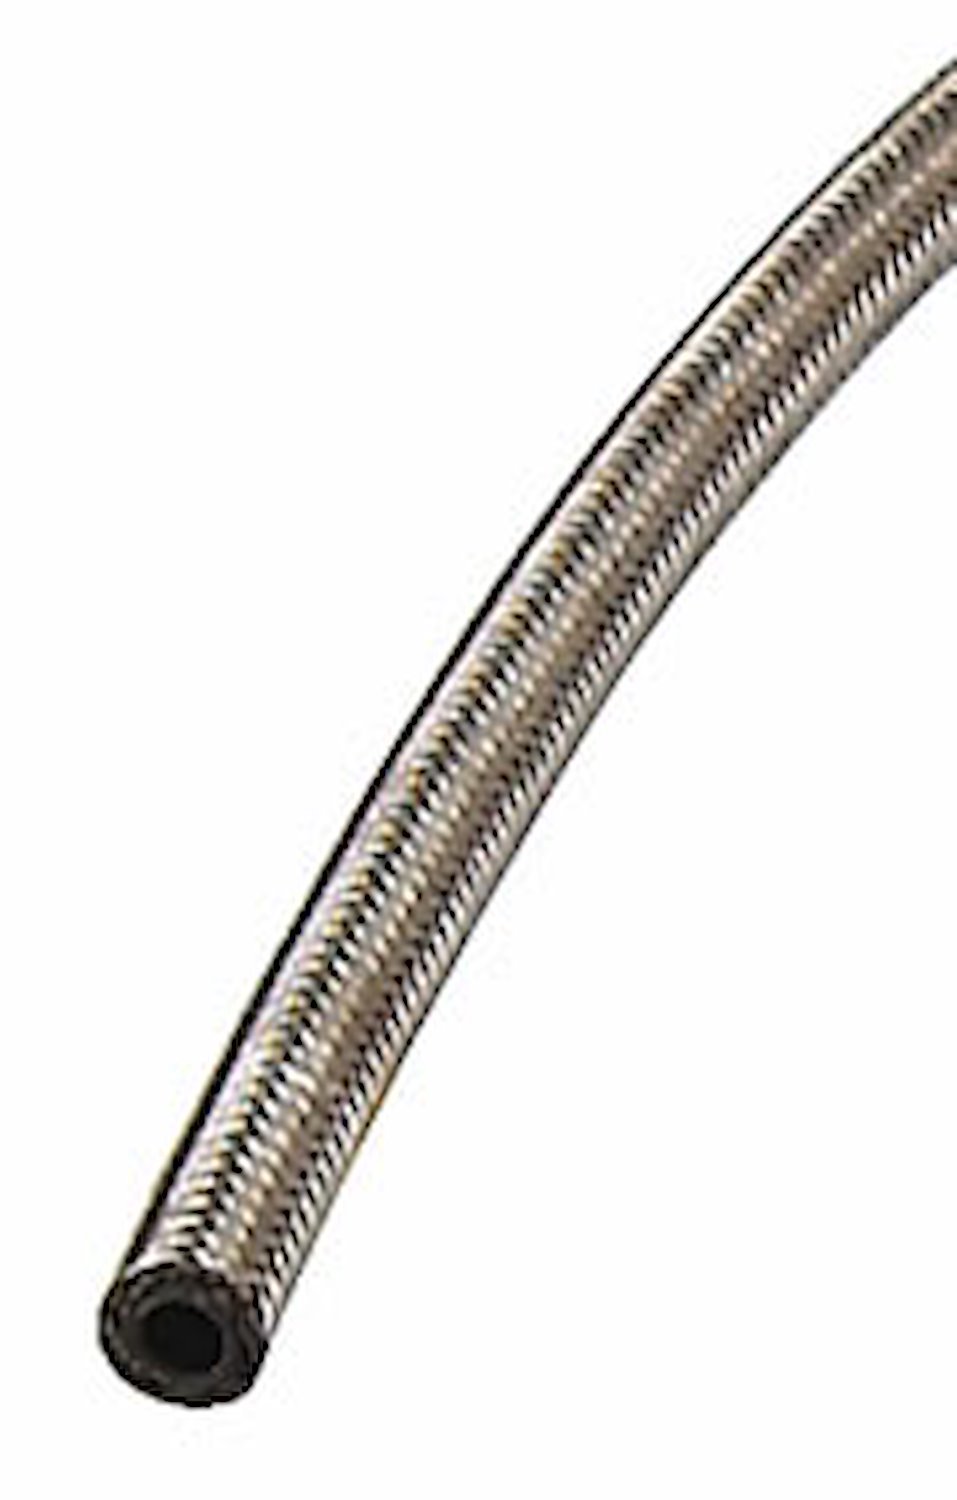 Pro-Flo 200 Series Stainless Steel Braided Hose -04